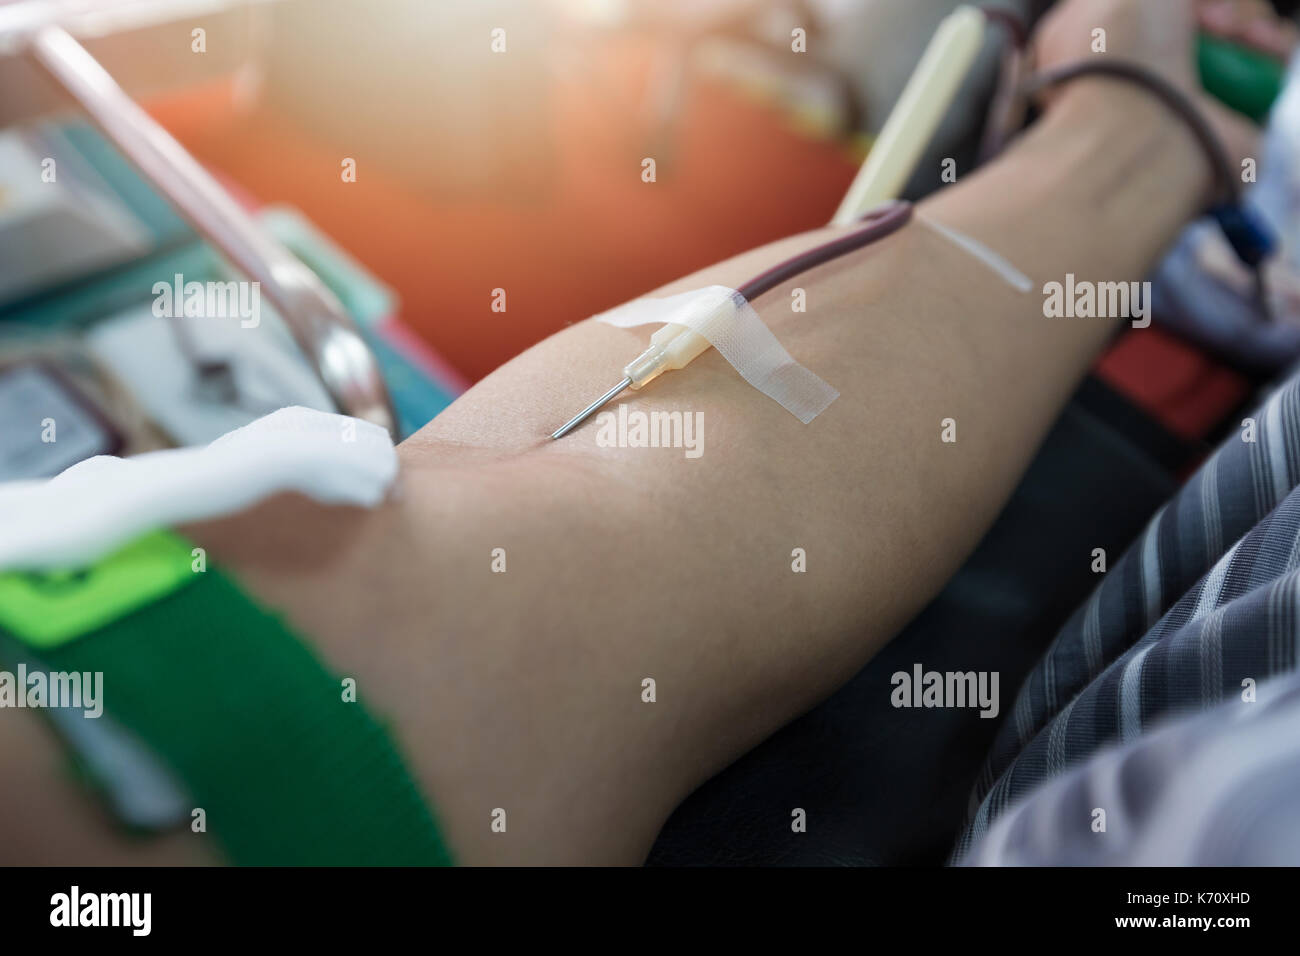 Nurse receiving blood from blood donor in hospital. Stock Photo